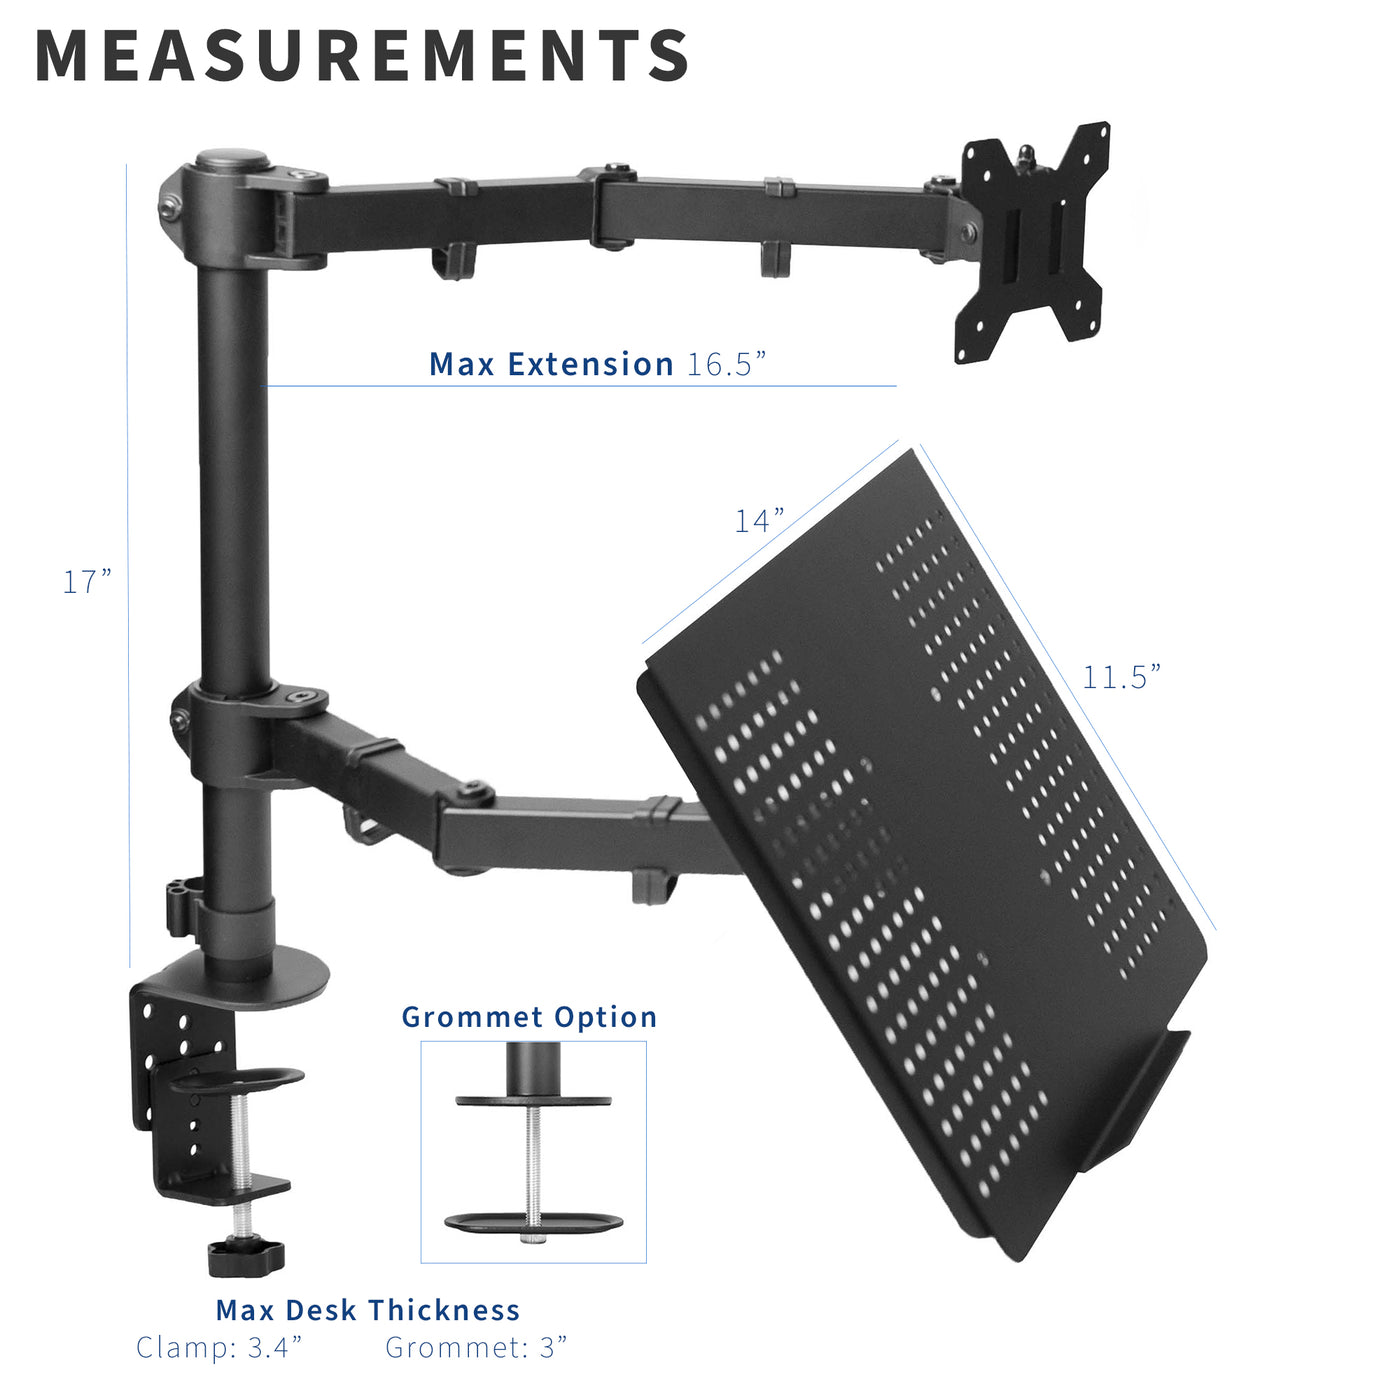 Fully adjustable single computer monitor and laptop desk mount allows you to display your laptop beneath your monitor screen for ergonomic placement.